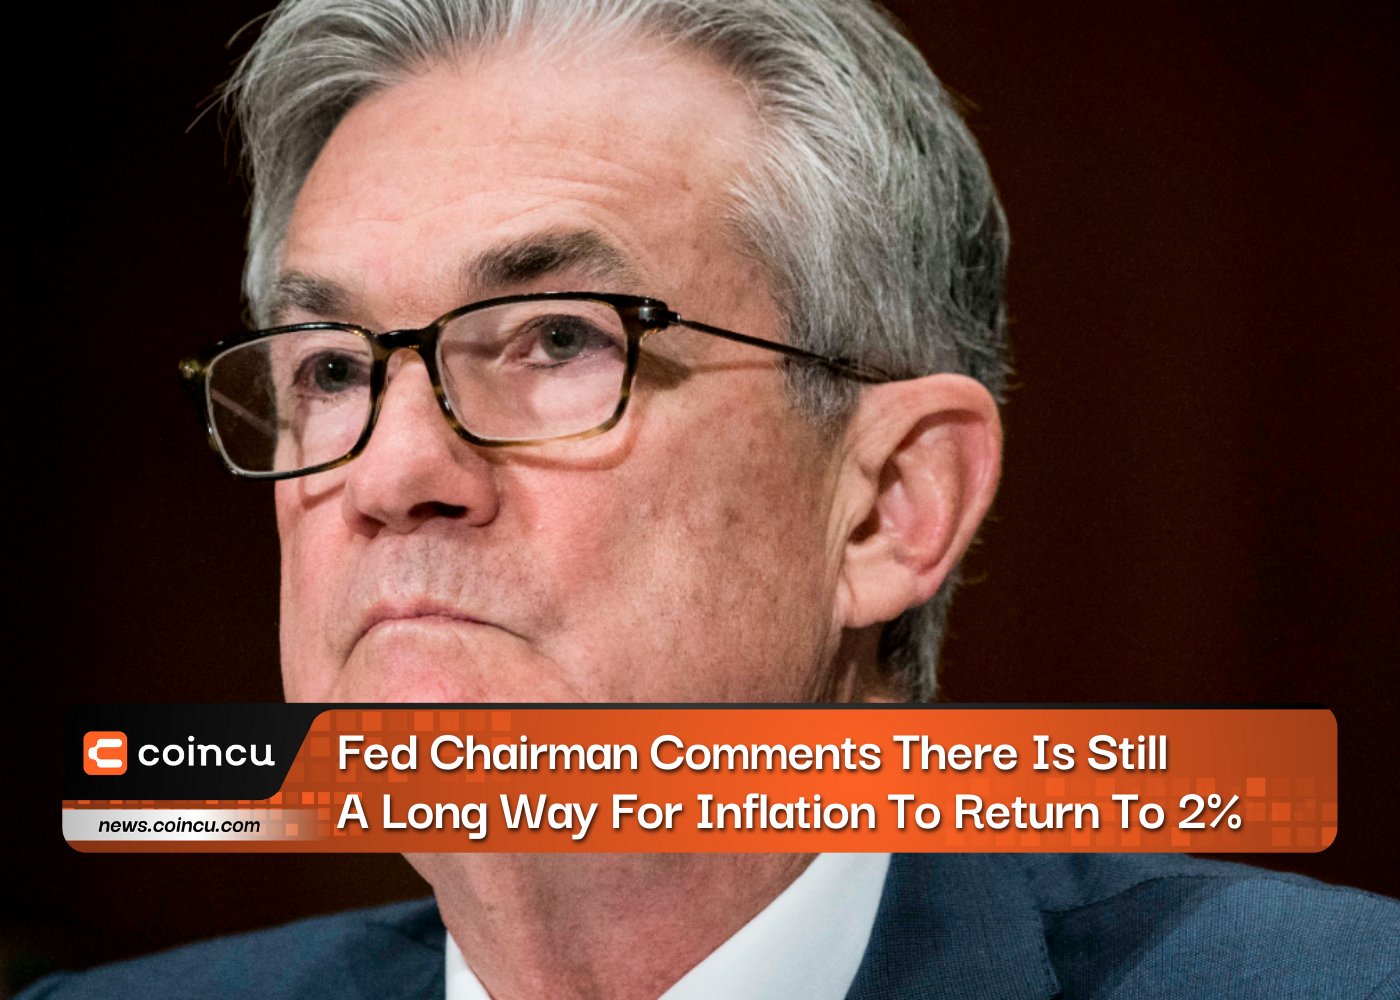 Fed Chairman Comments There Is Still A Long Way For Inflation To Return To 2%